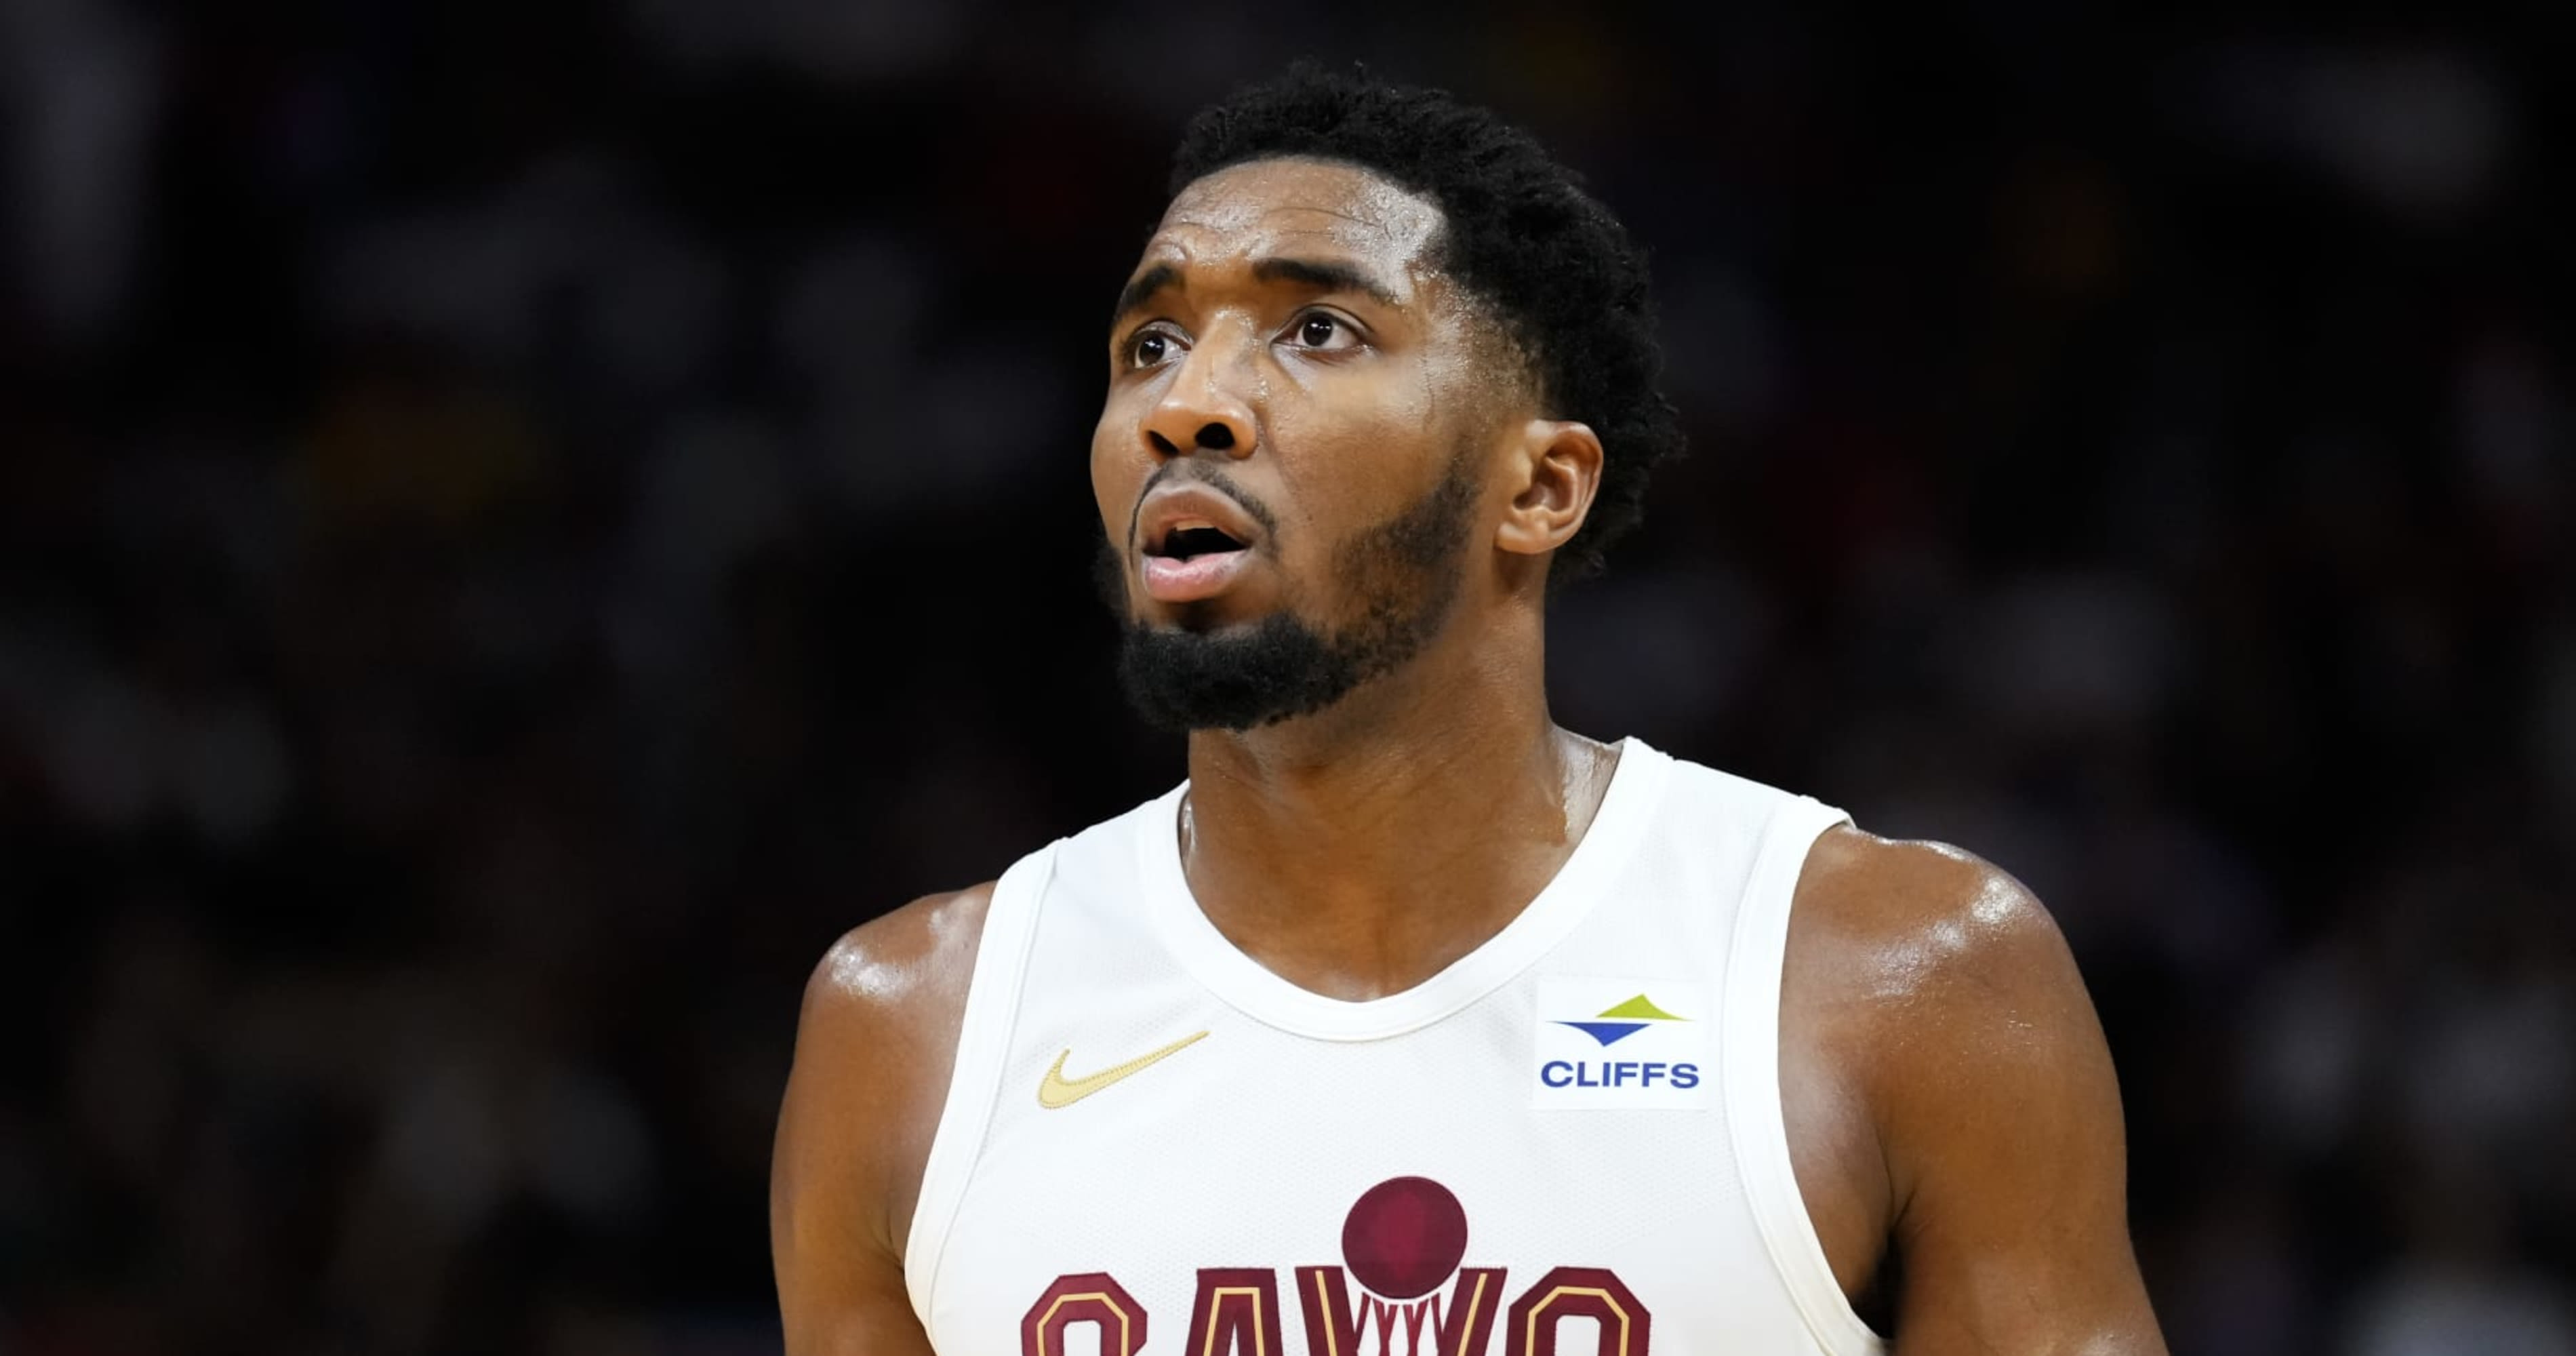 New Donovan Mitchell Trade Packages for Lakers, Nets and Teams with 'Offers Ready'